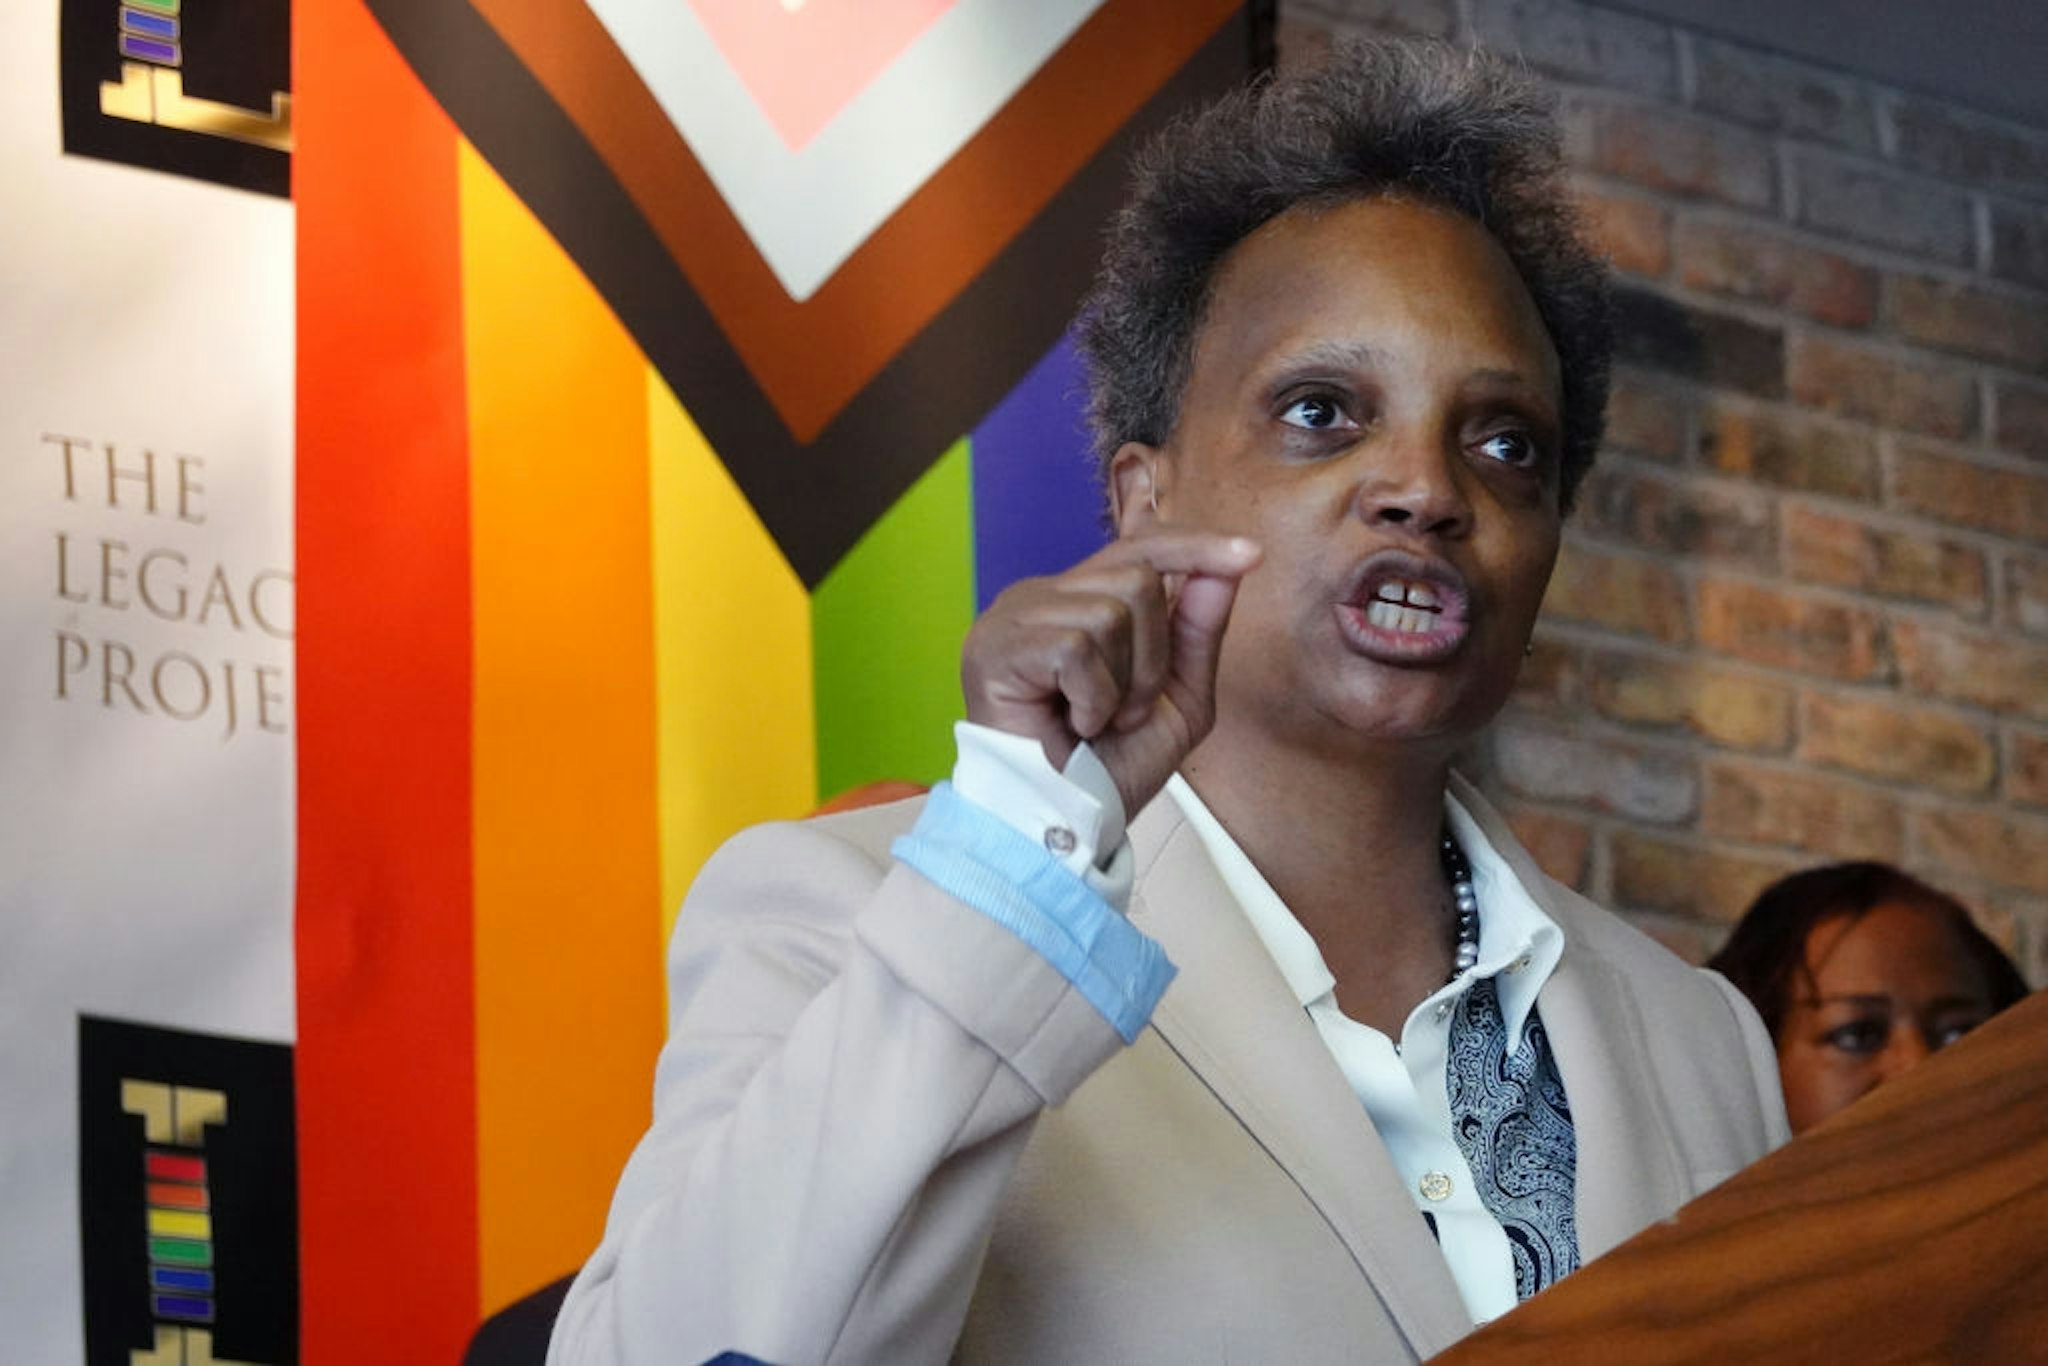 Chicago Mayor Lori Lightfoot speaks to guests at an event held to celebrate Pride Month at the Center on Halstead, a lesbian, gay, bisexual, and transgender community center, on June 07, 2021 in Chicago, Illinois.